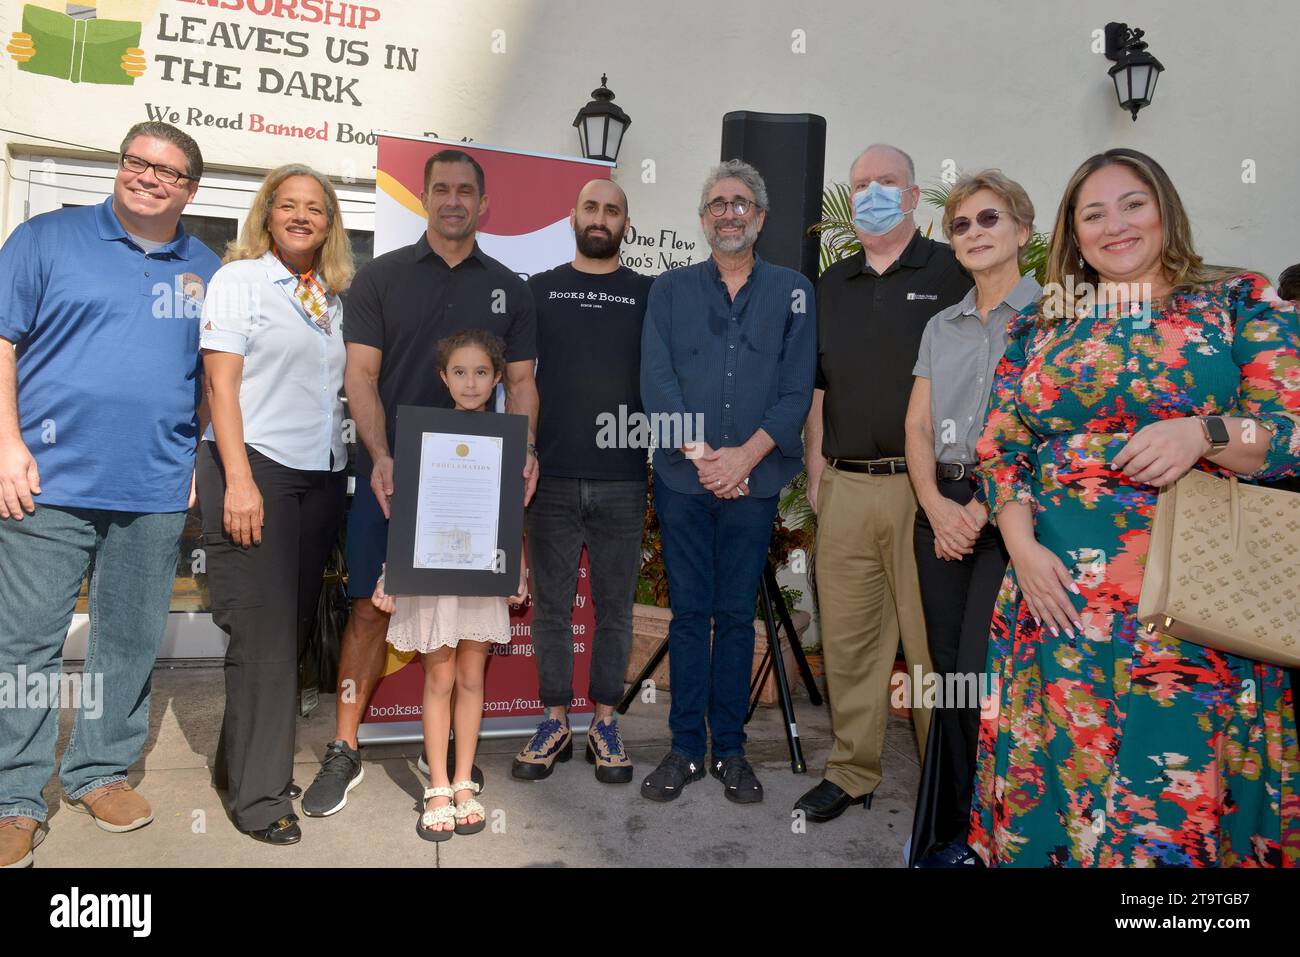 CORAL GABLES, FLORIDA - NOVEMBER 25: Coral Gables Commissioner Alex Fernandez, Althea Harris of the Small Business Administration, Coral Gables Mayor Vince Lago and daughter, Books & Books' Jonah Kaplan and Mitchell Kaplan, Coral Gables Chamber of Commerce President Mark Trowbridge, Coral Gables Commissioner Rhonda Anderson and Gables Chamber of Commerce Chair Sara M. Hernandez attend the celebrated and launch of Books & Books Literary new nonprofit Foundation with the Coral Gables business and literary community and the Coral Gables Chamber of Commerce Small Business Saturday at Books and Boo Stock Photo